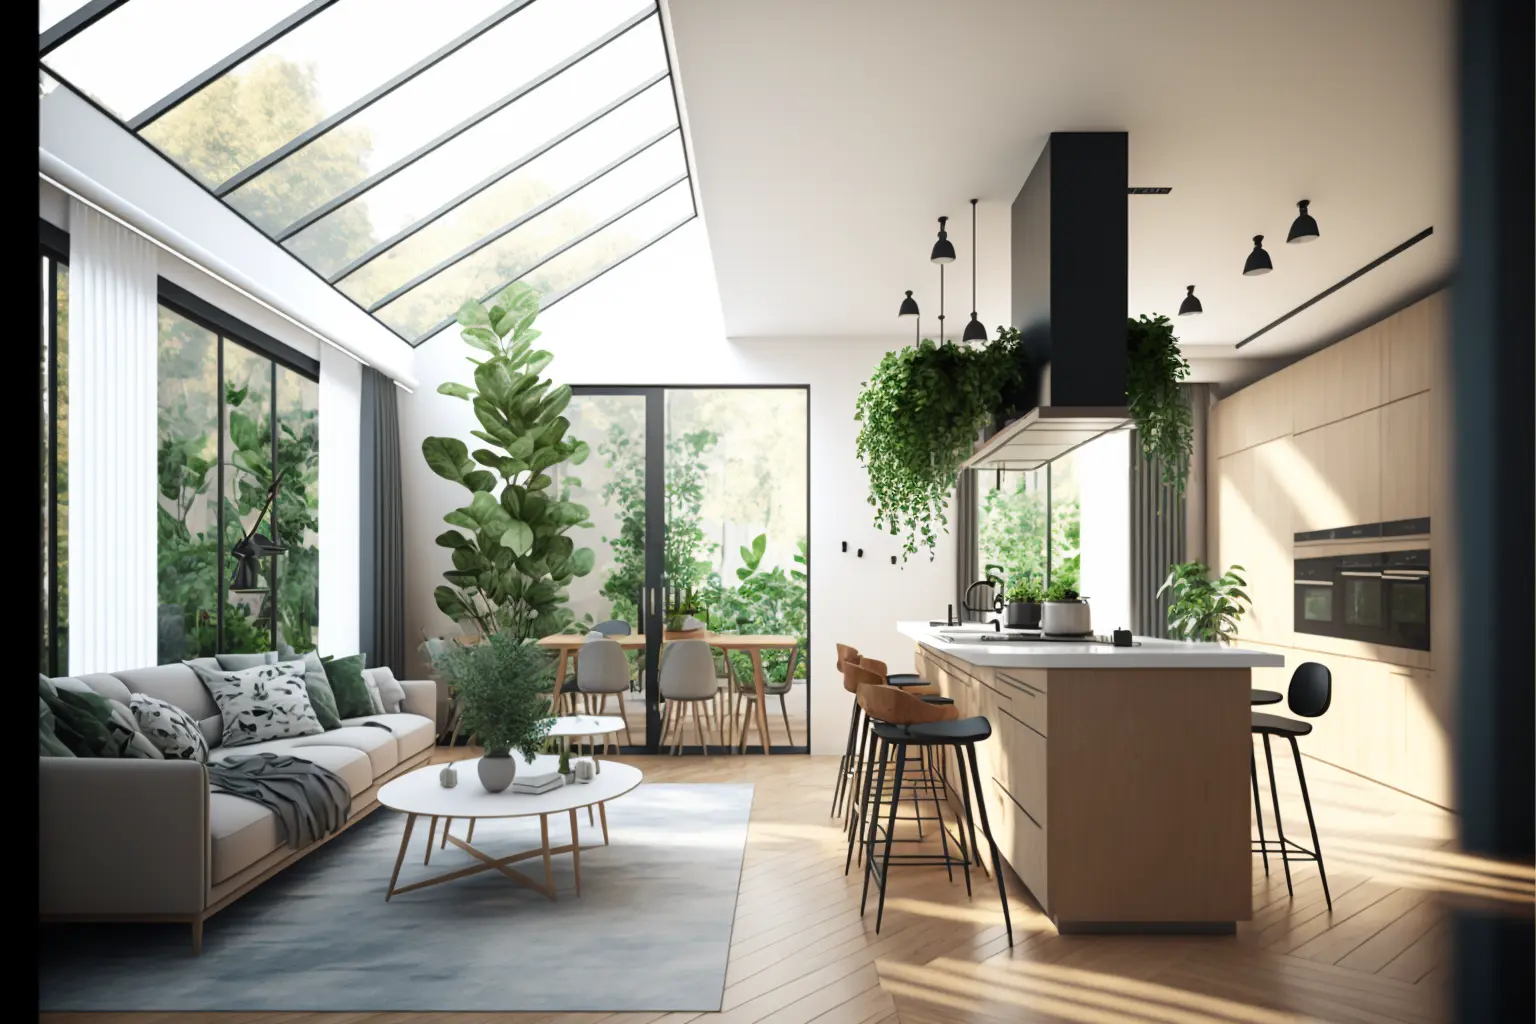 Interior Design, a perspective of of a living room and a kitchen with an island, large windows with natural light, Light colors, vegetation, modern furniture, skylight, modern minimalistic design